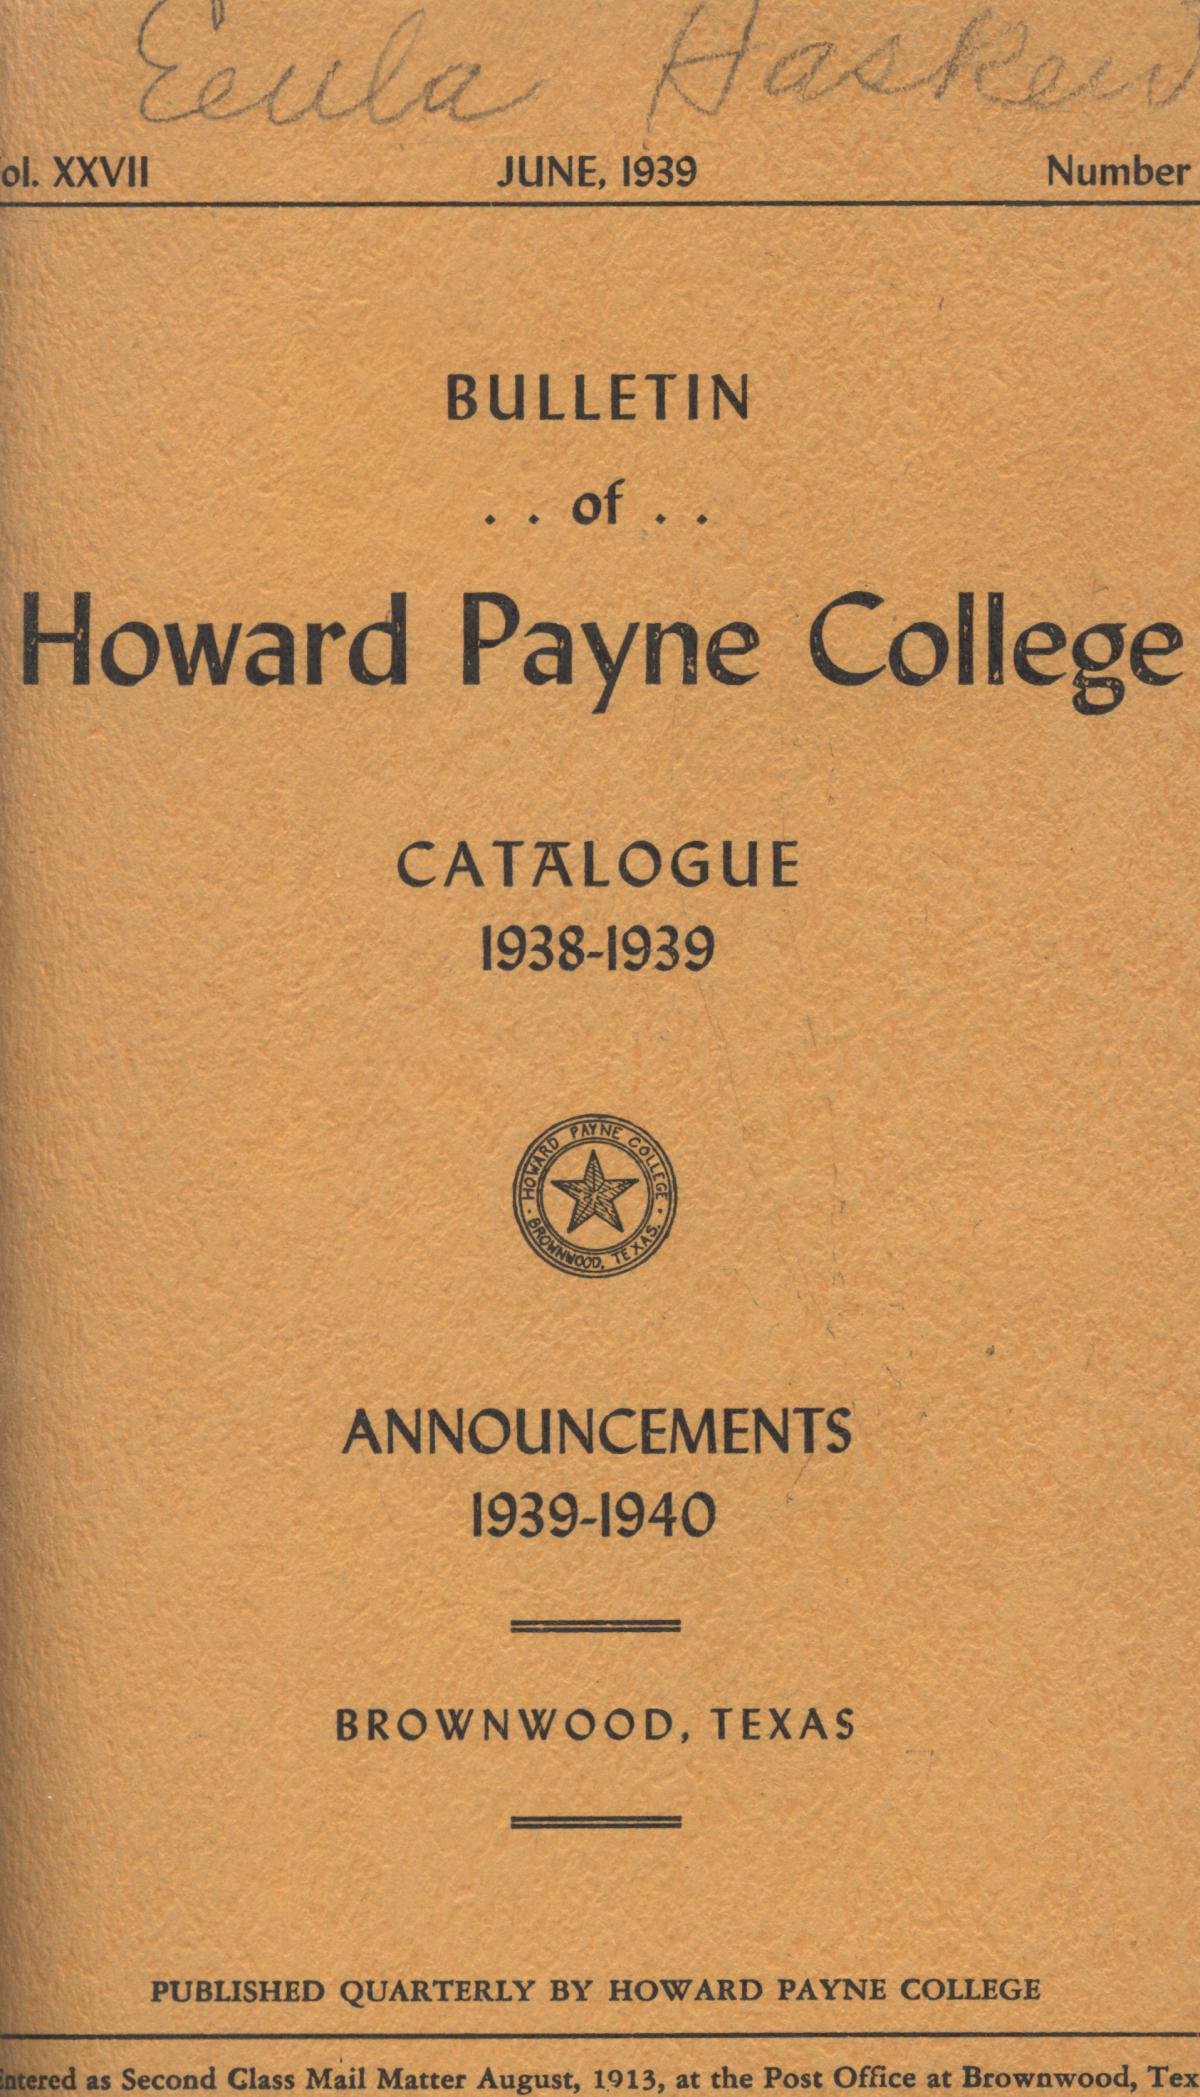 Catalogue of Howard Payne College, 1938-1939
                                                
                                                    Front Cover
                                                